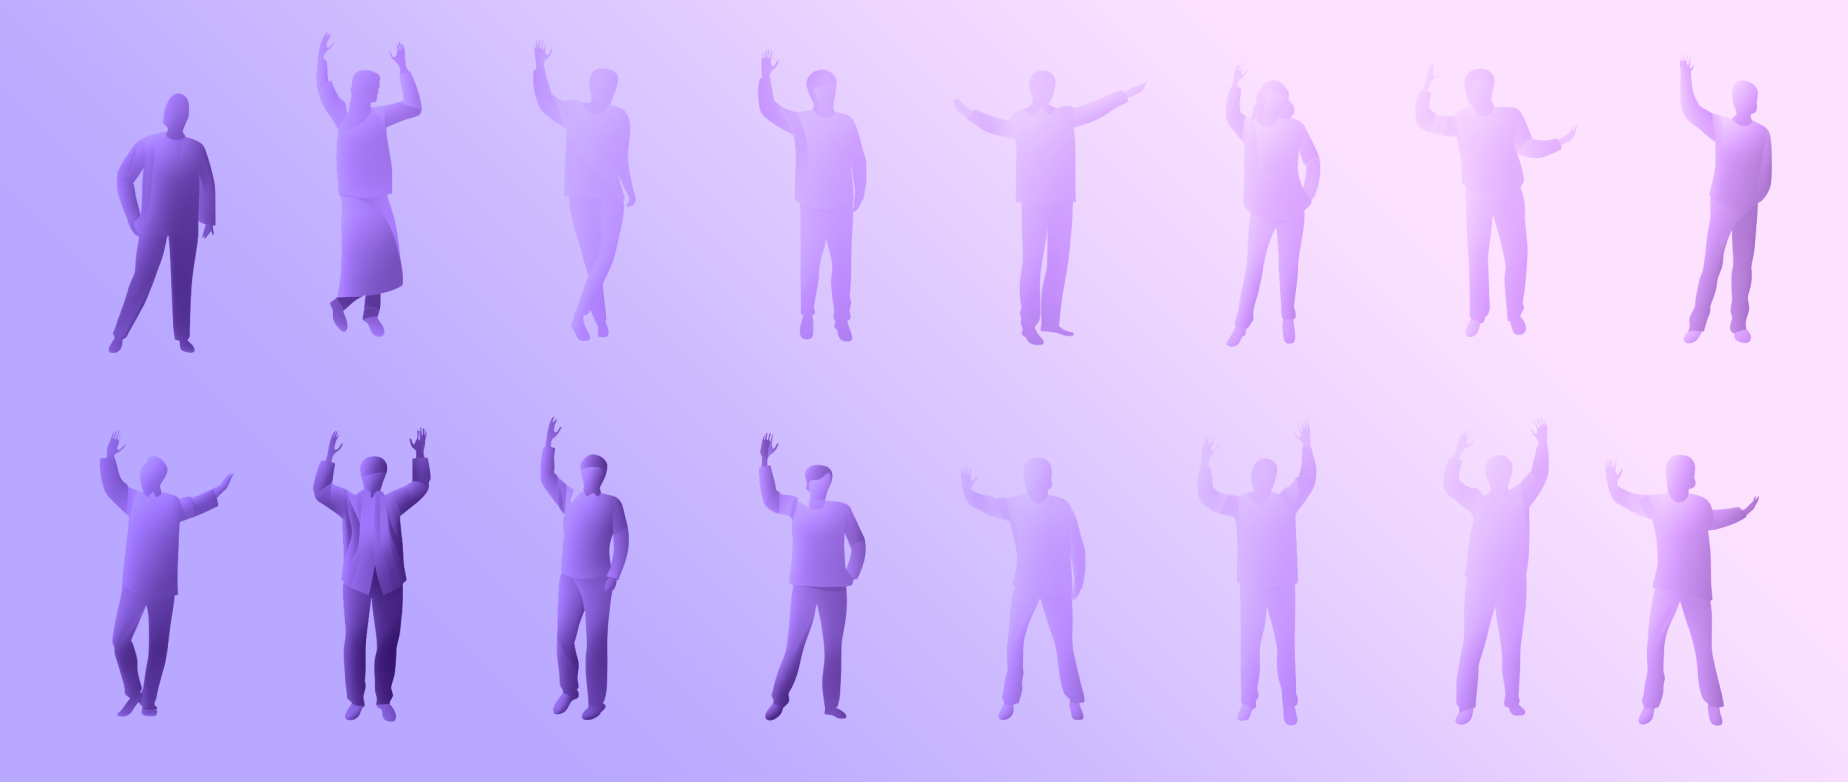 Two rows of eight purple silhouettes of people on a light purple background.